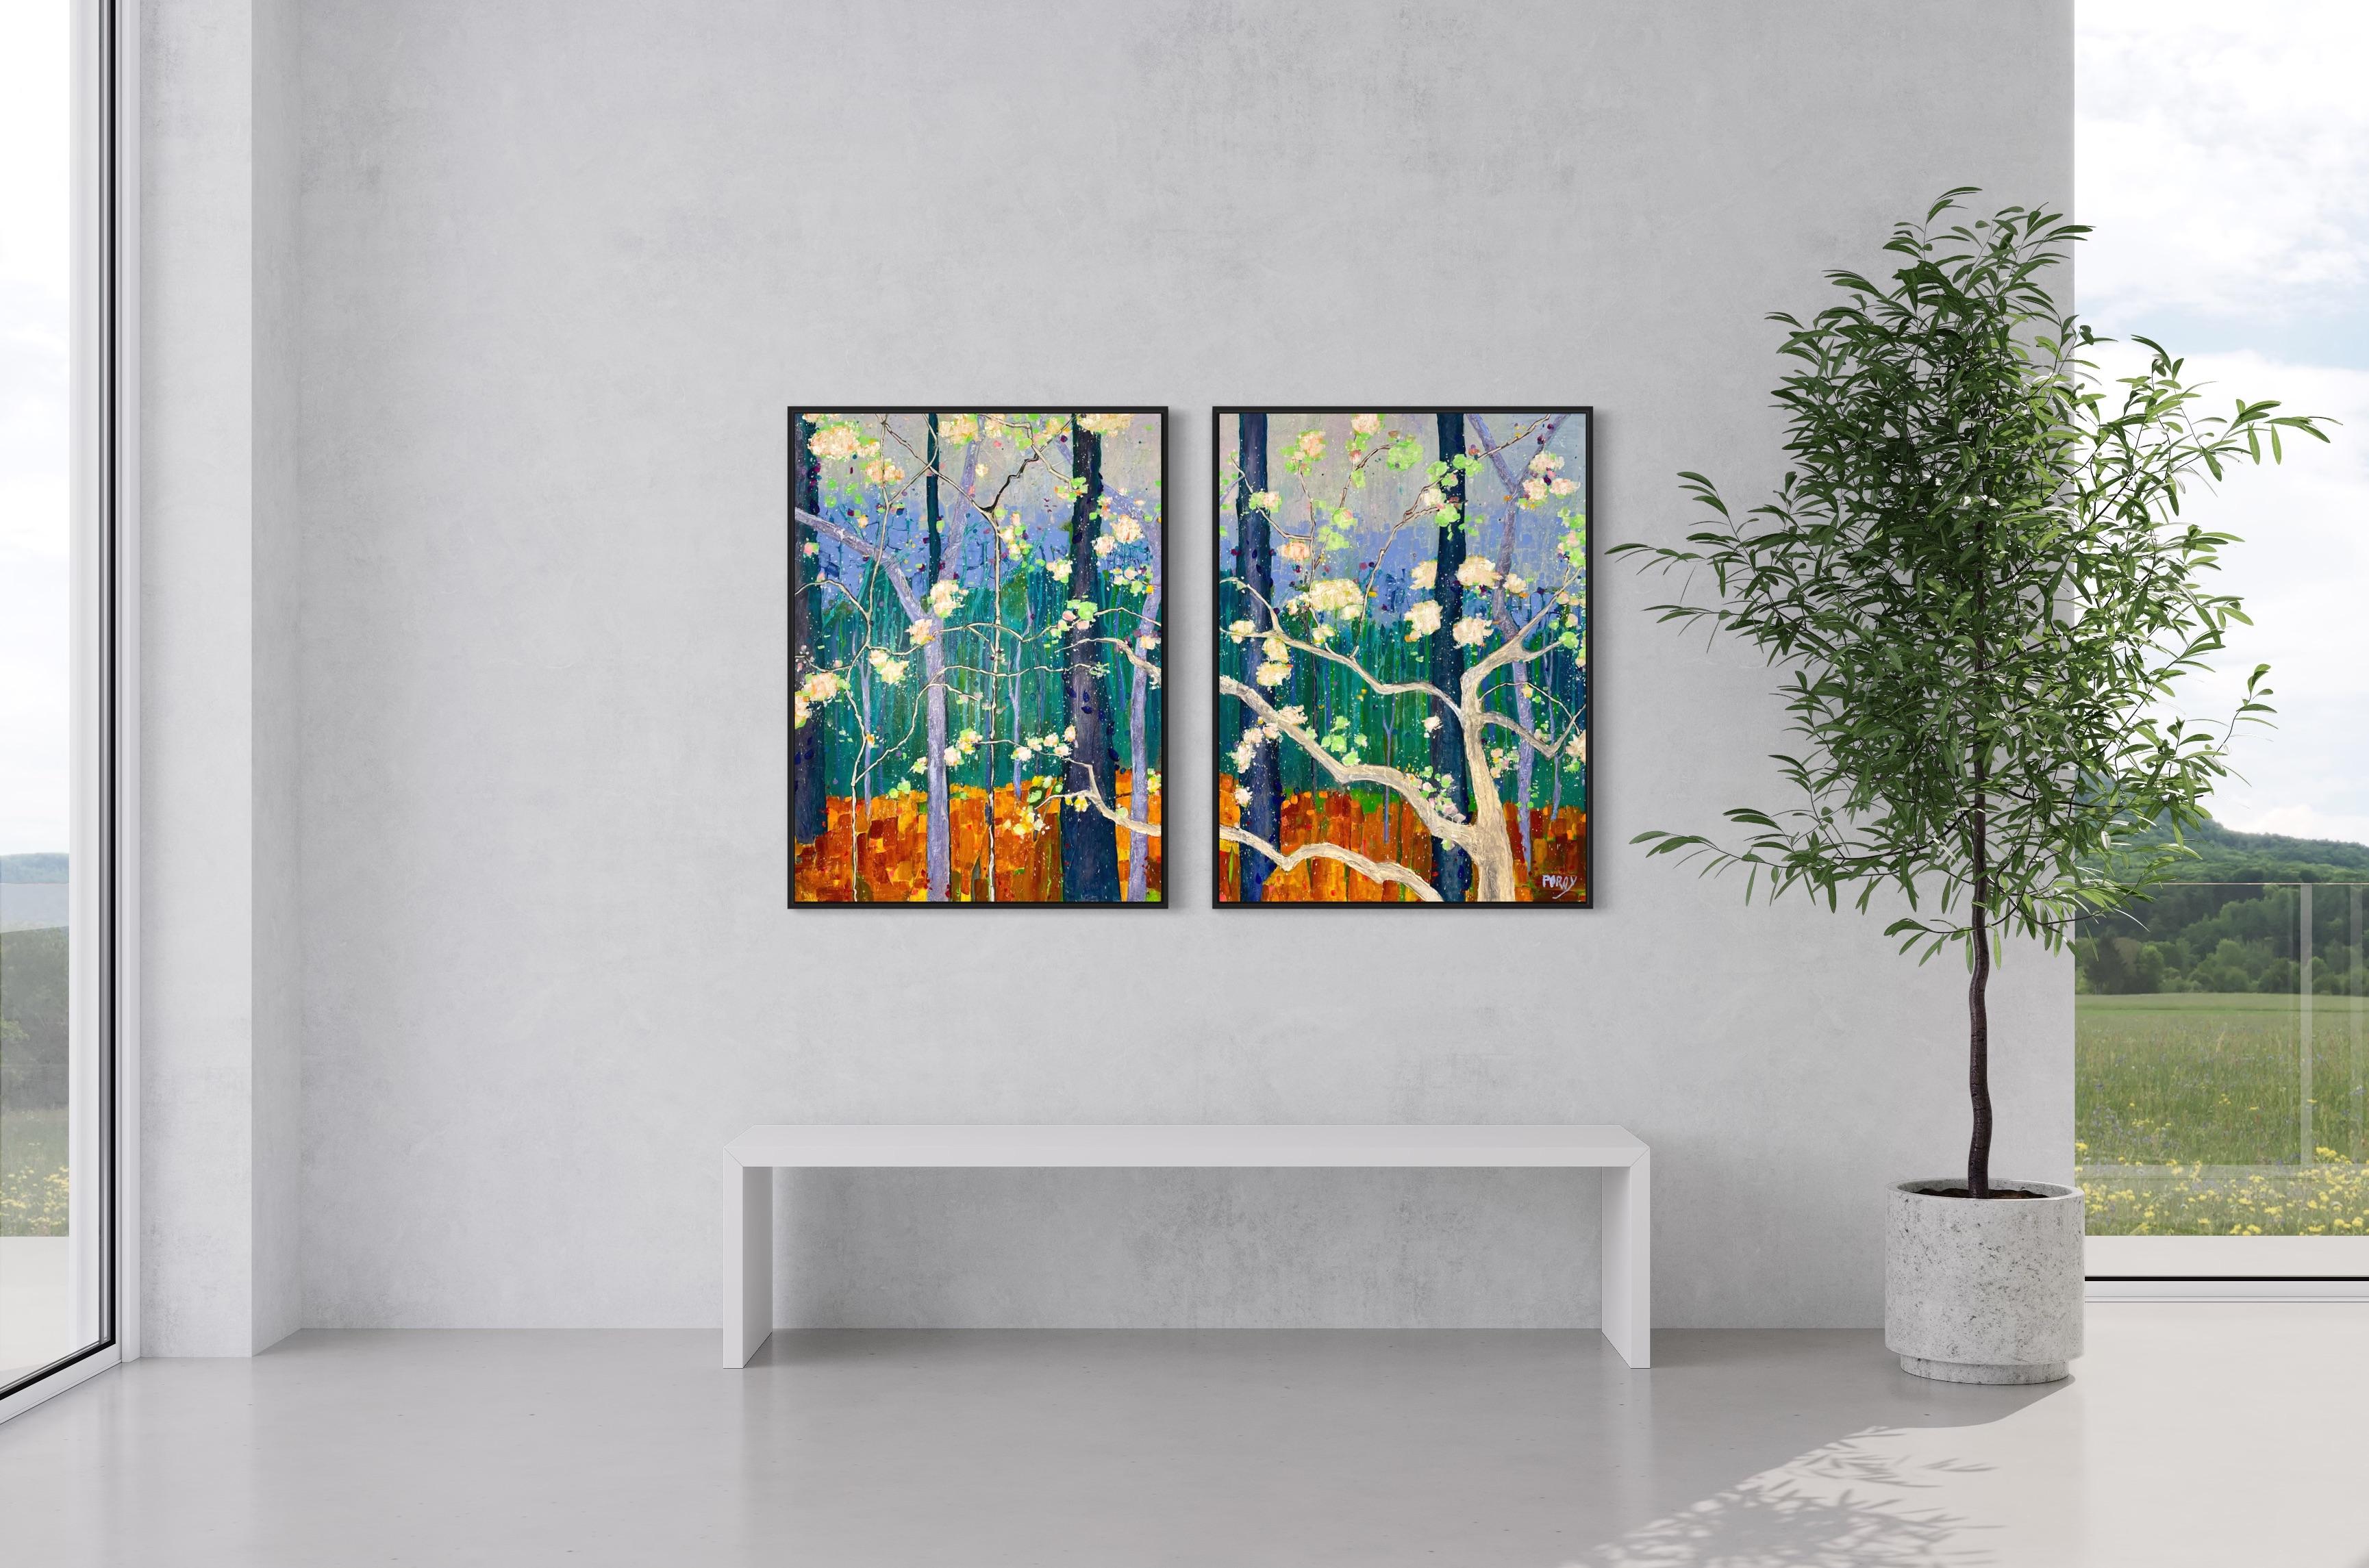 'Dancing Blossoms' Colorful Flower Diptych Abstract Expressionist Dreamscape - Painting by Maria Poroy